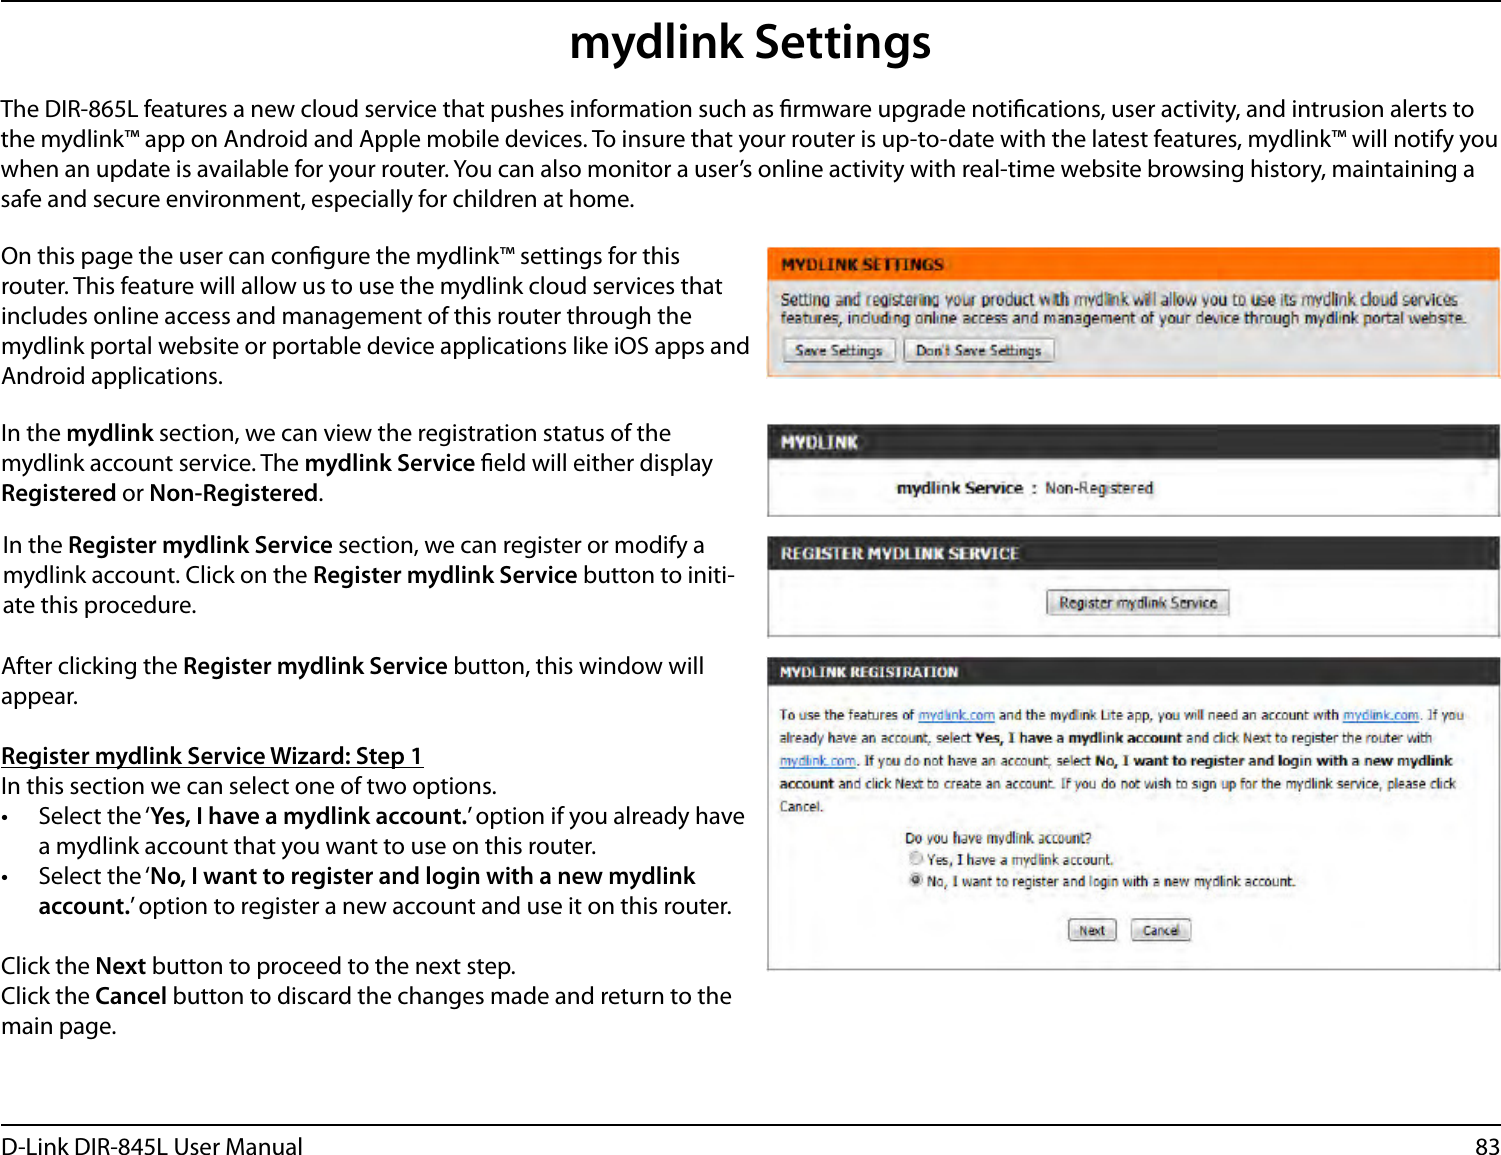 83D-Link DIR-845L User Manualmydlink SettingsOn this page the user can congure the mydlink™ settings for this router. This feature will allow us to use the mydlink cloud services that includes online access and management of this router through the mydlink portal website or portable device applications like iOS apps and Android applications.In the mydlink section, we can view the registration status of the mydlink account service. The mydlink Service eld will either display Registered or Non-Registered.In the Register mydlink Service section, we can register or modify a mydlink account. Click on the Register mydlink Service button to initi-ate this procedure.After clicking the Register mydlink Service button, this window will appear.Register mydlink Service Wizard: Step 1In this section we can select one of two options.•  Select the ‘Yes, I have a mydlink account.’ option if you already have a mydlink account that you want to use on this router. •  Select the ‘No, I want to register and login with a new mydlink account.’ option to register a new account and use it on this router.Click the Next button to proceed to the next step. Click the Cancel button to discard the changes made and return to the main page.The DIR-865L features a new cloud service that pushes information such as rmware upgrade notications, user activity, and intrusion alerts to the mydlink™ app on Android and Apple mobile devices. To insure that your router is up-to-date with the latest features, mydlink™ will notify you when an update is available for your router. You can also monitor a user’s online activity with real-time website browsing history, maintaining a safe and secure environment, especially for children at home.